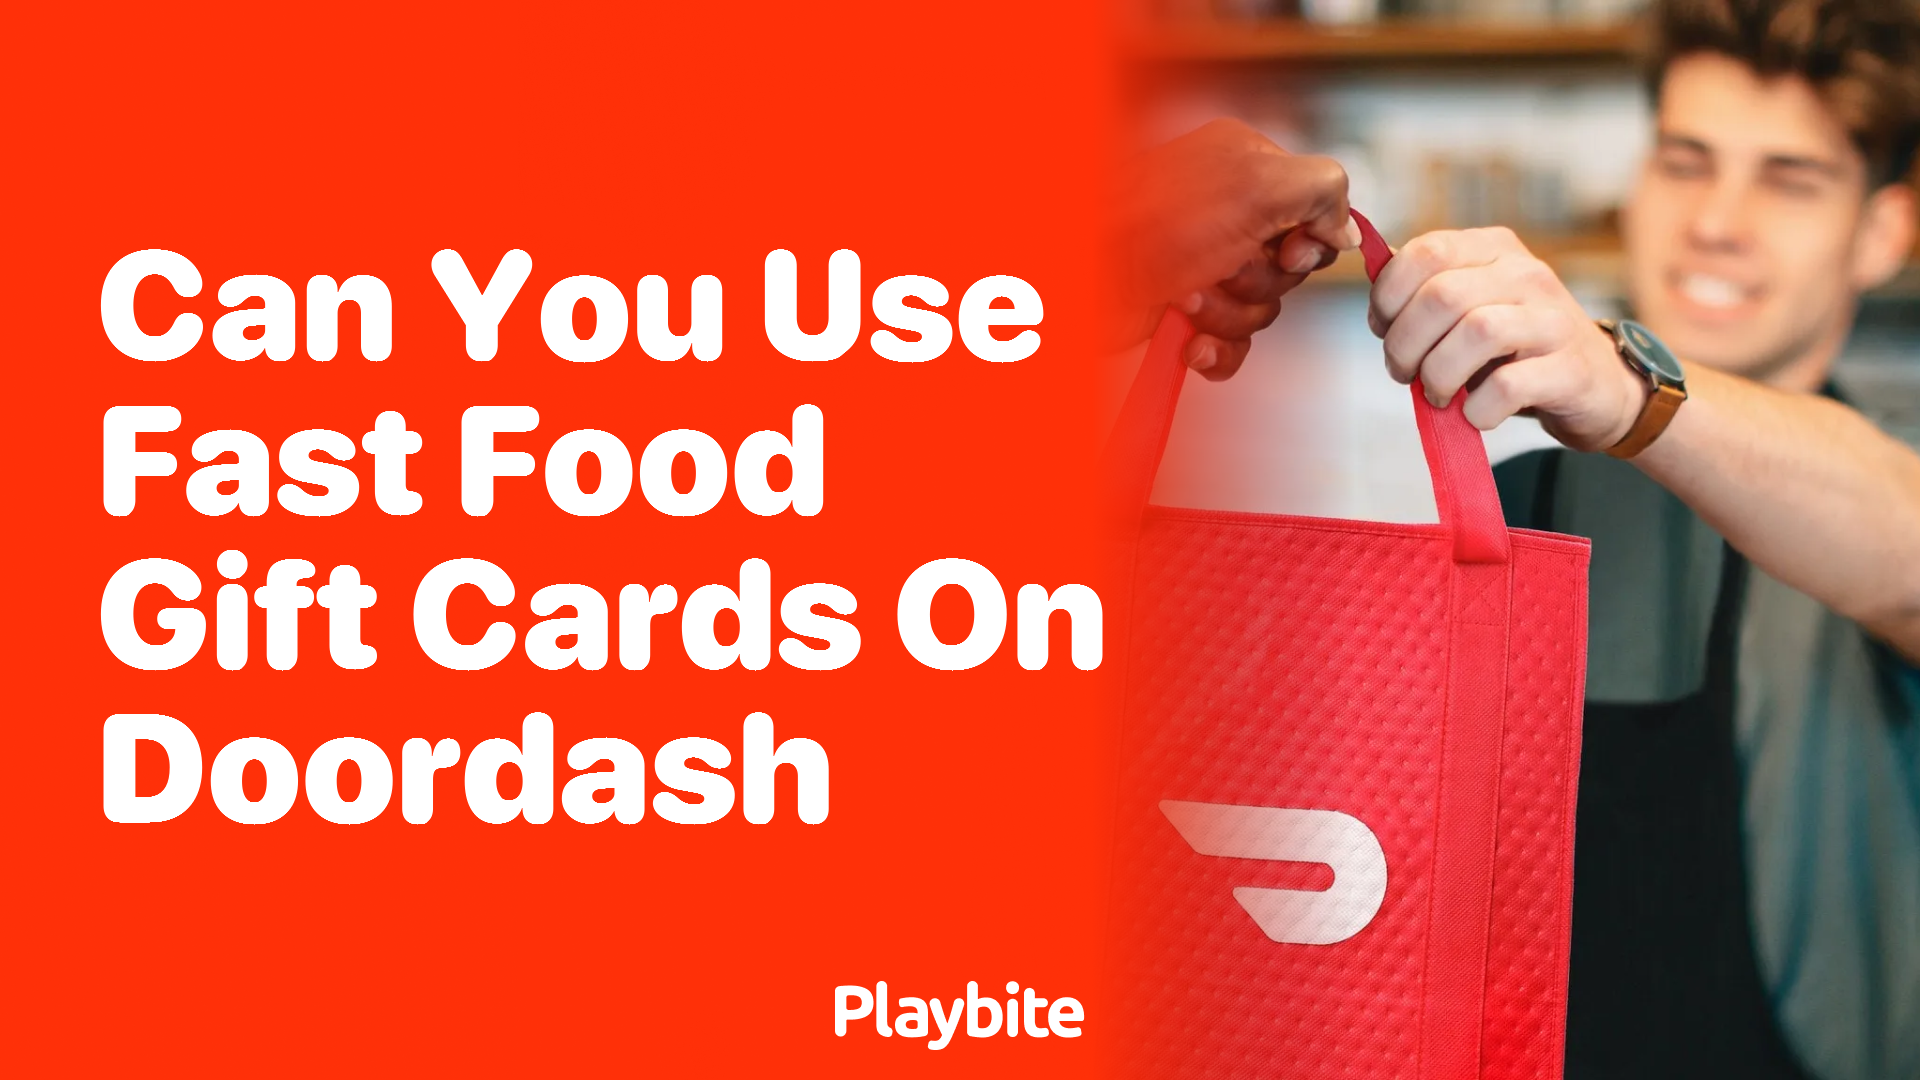 Can You Use Fast Food Gift Cards on DoorDash?